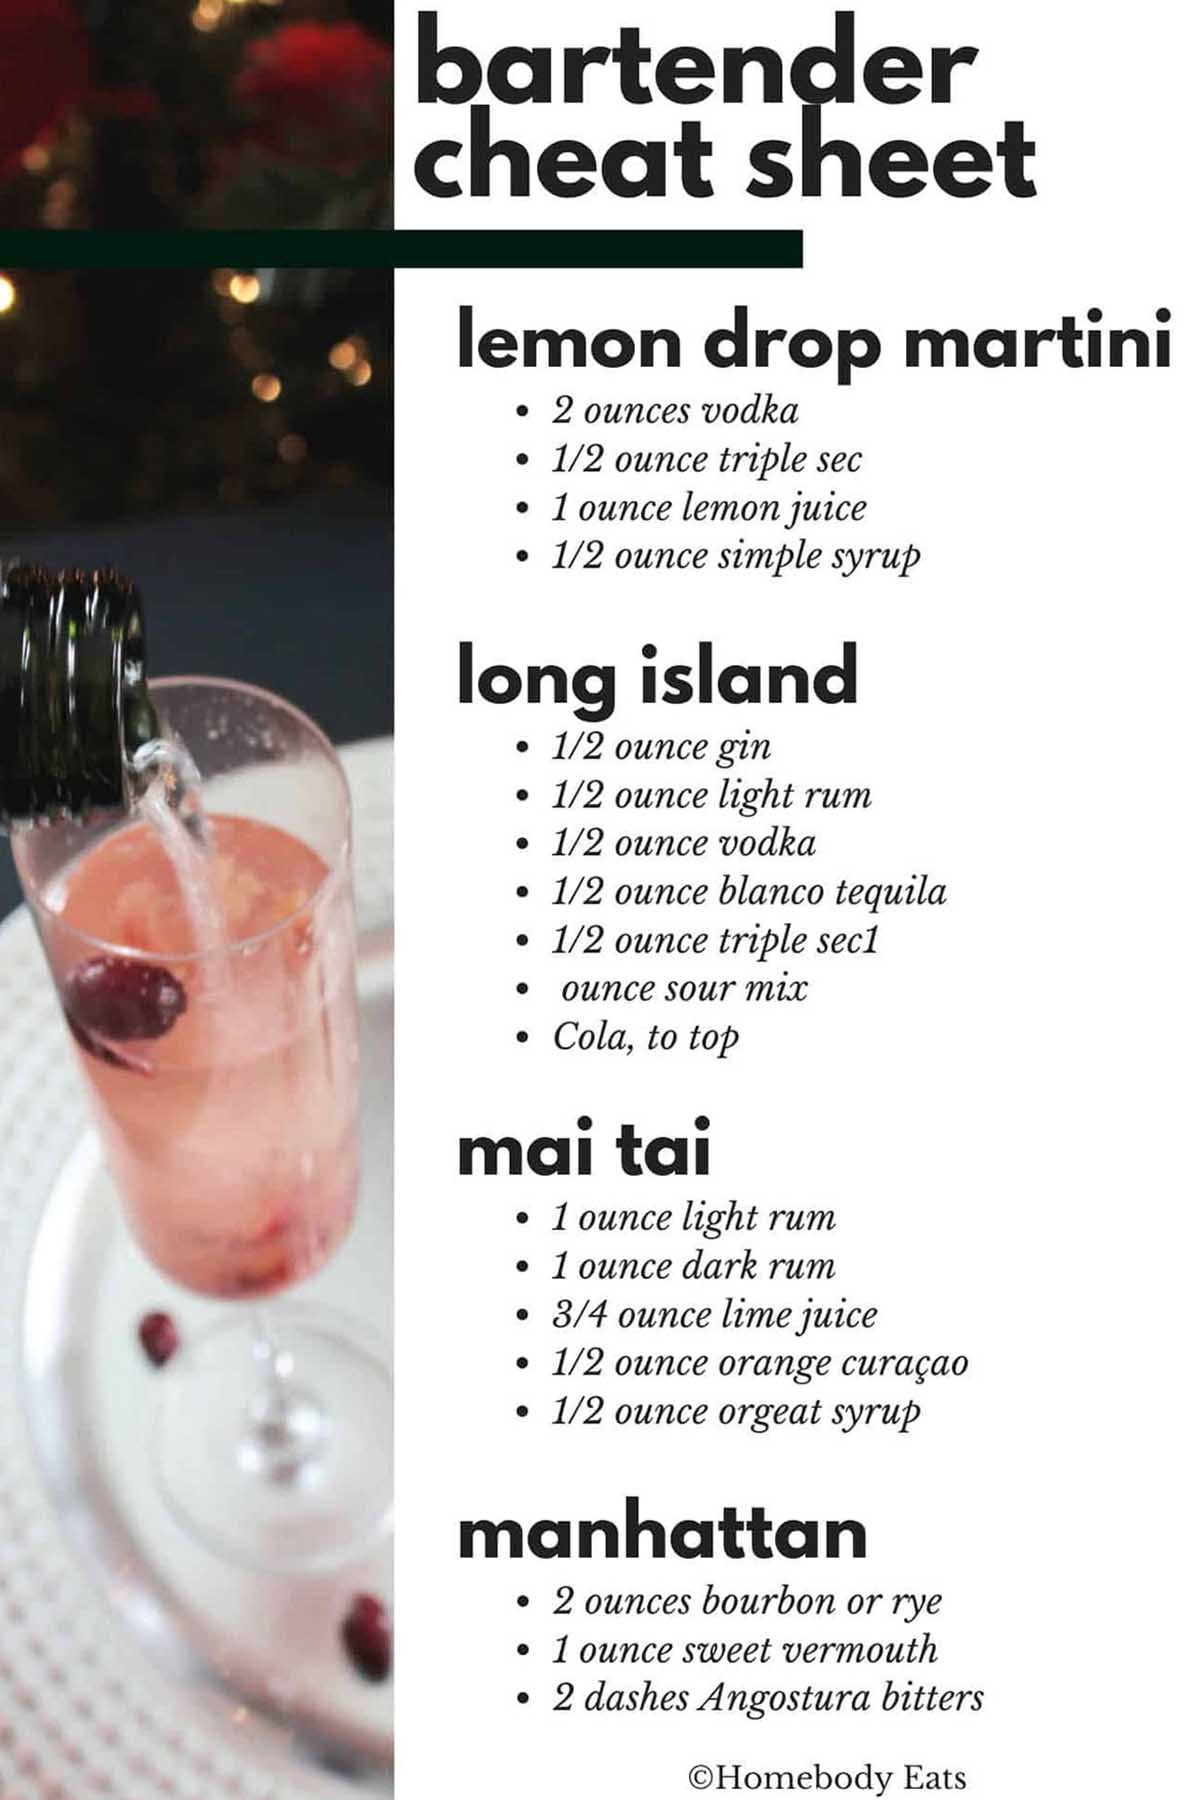 bartender cheat sheet with cocktail recipes.